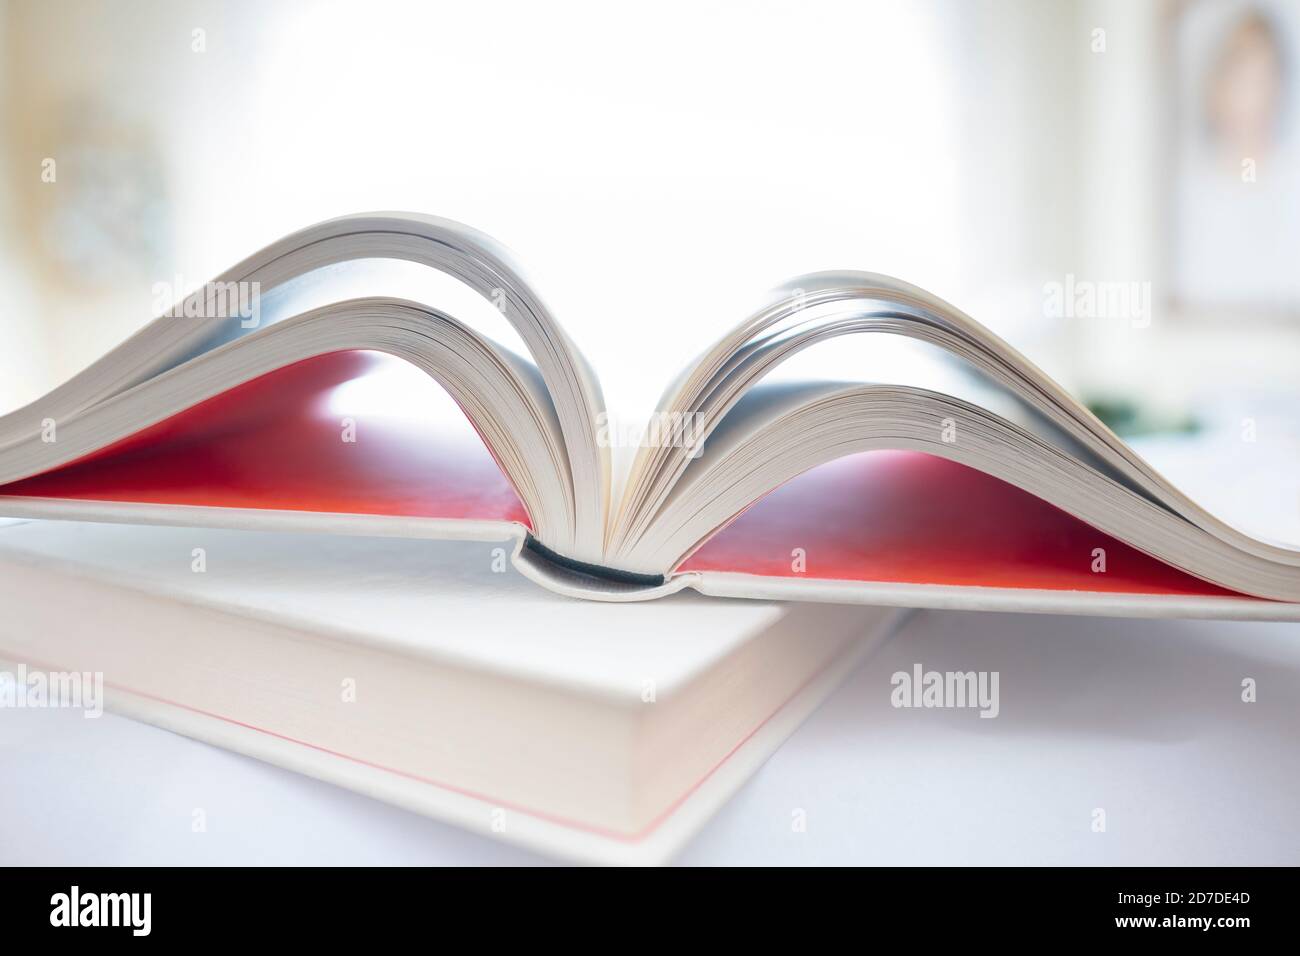 Shallow focus on open book in home environment. Focus on spine of book. Unfocused home environment Stock Photo